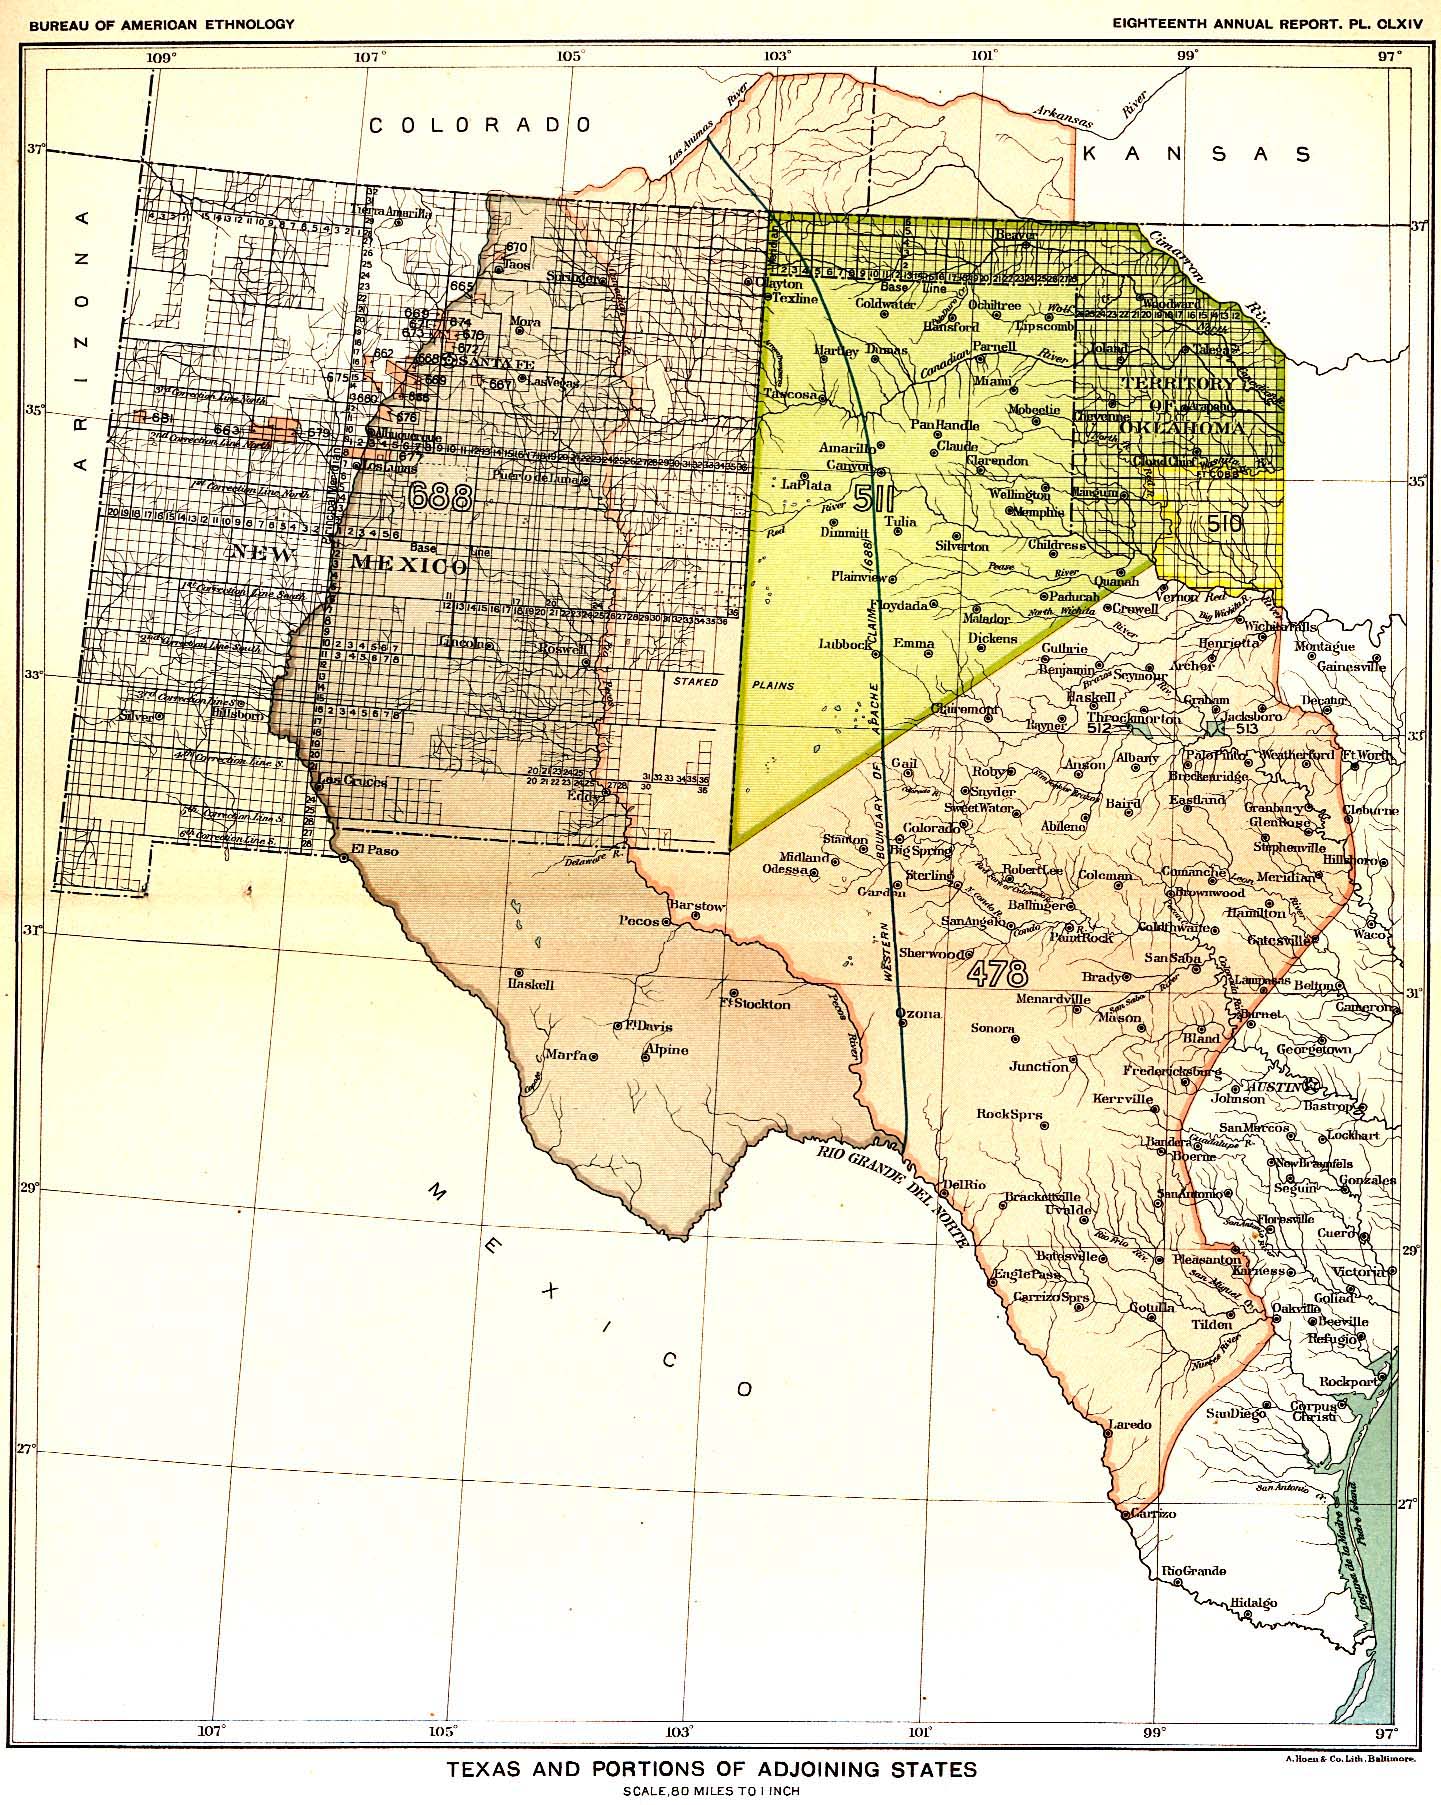 Texas & Portions of Adjoining States, Map 
57